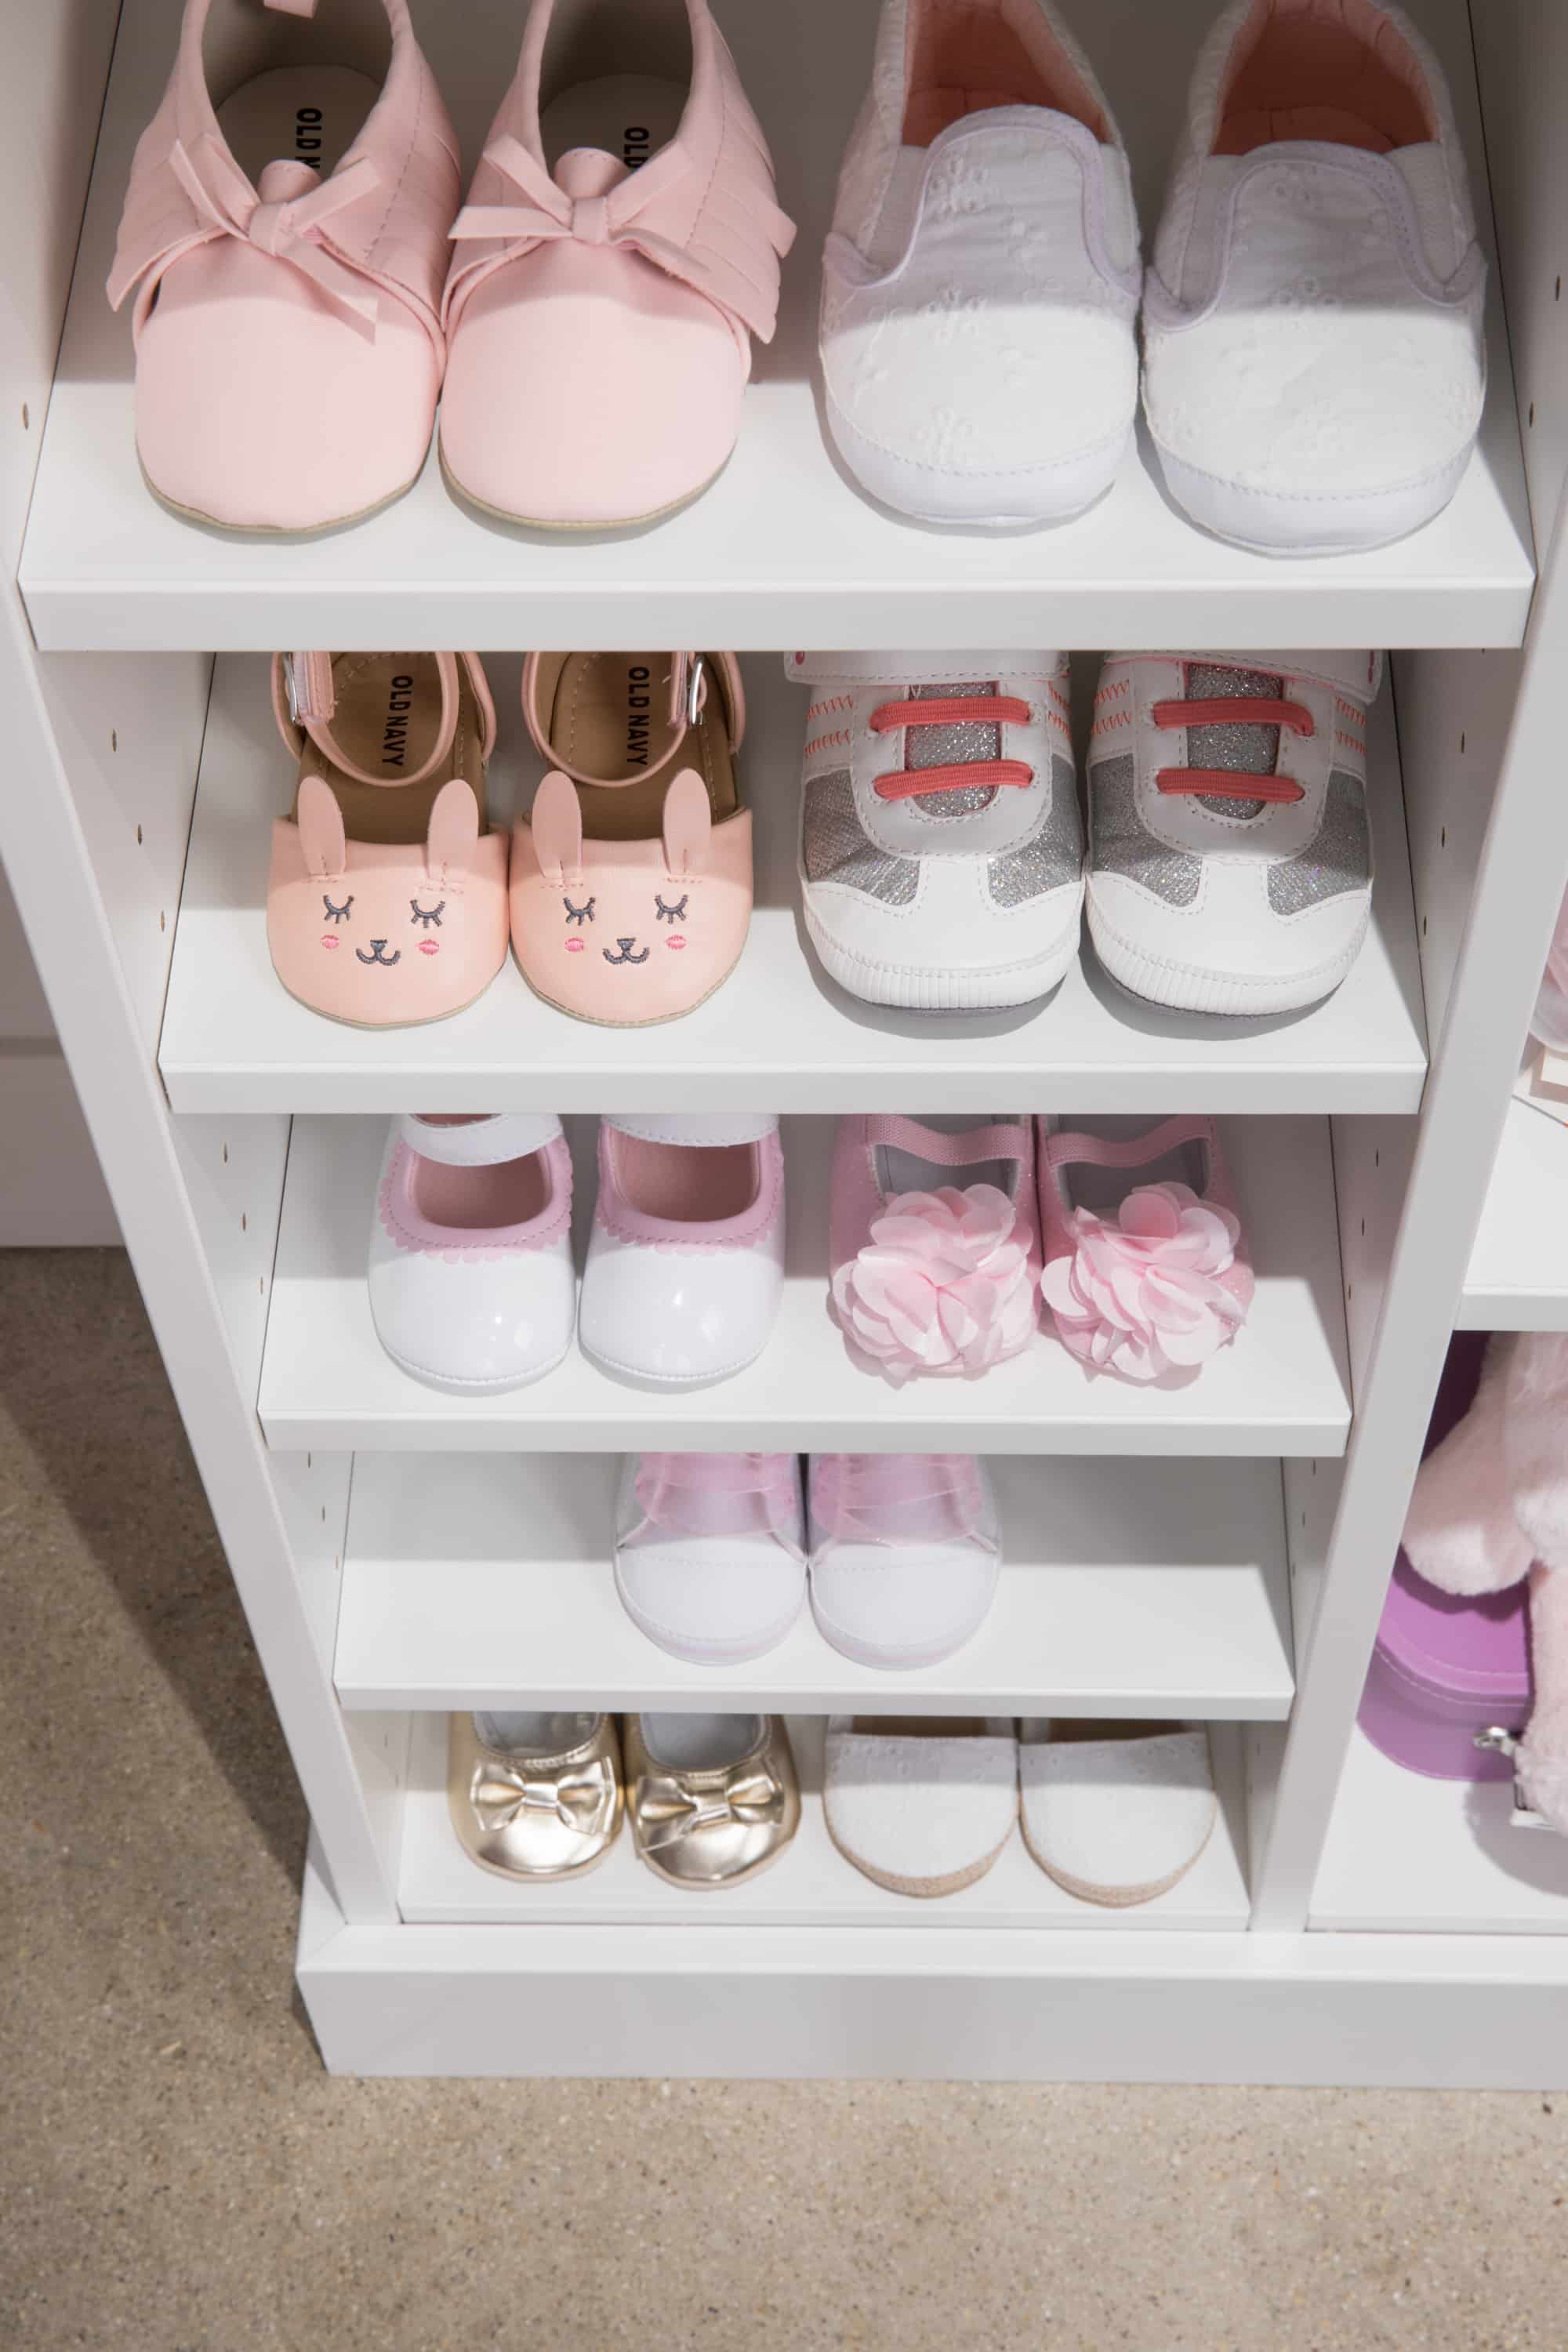 Girls shoes placed on shelves